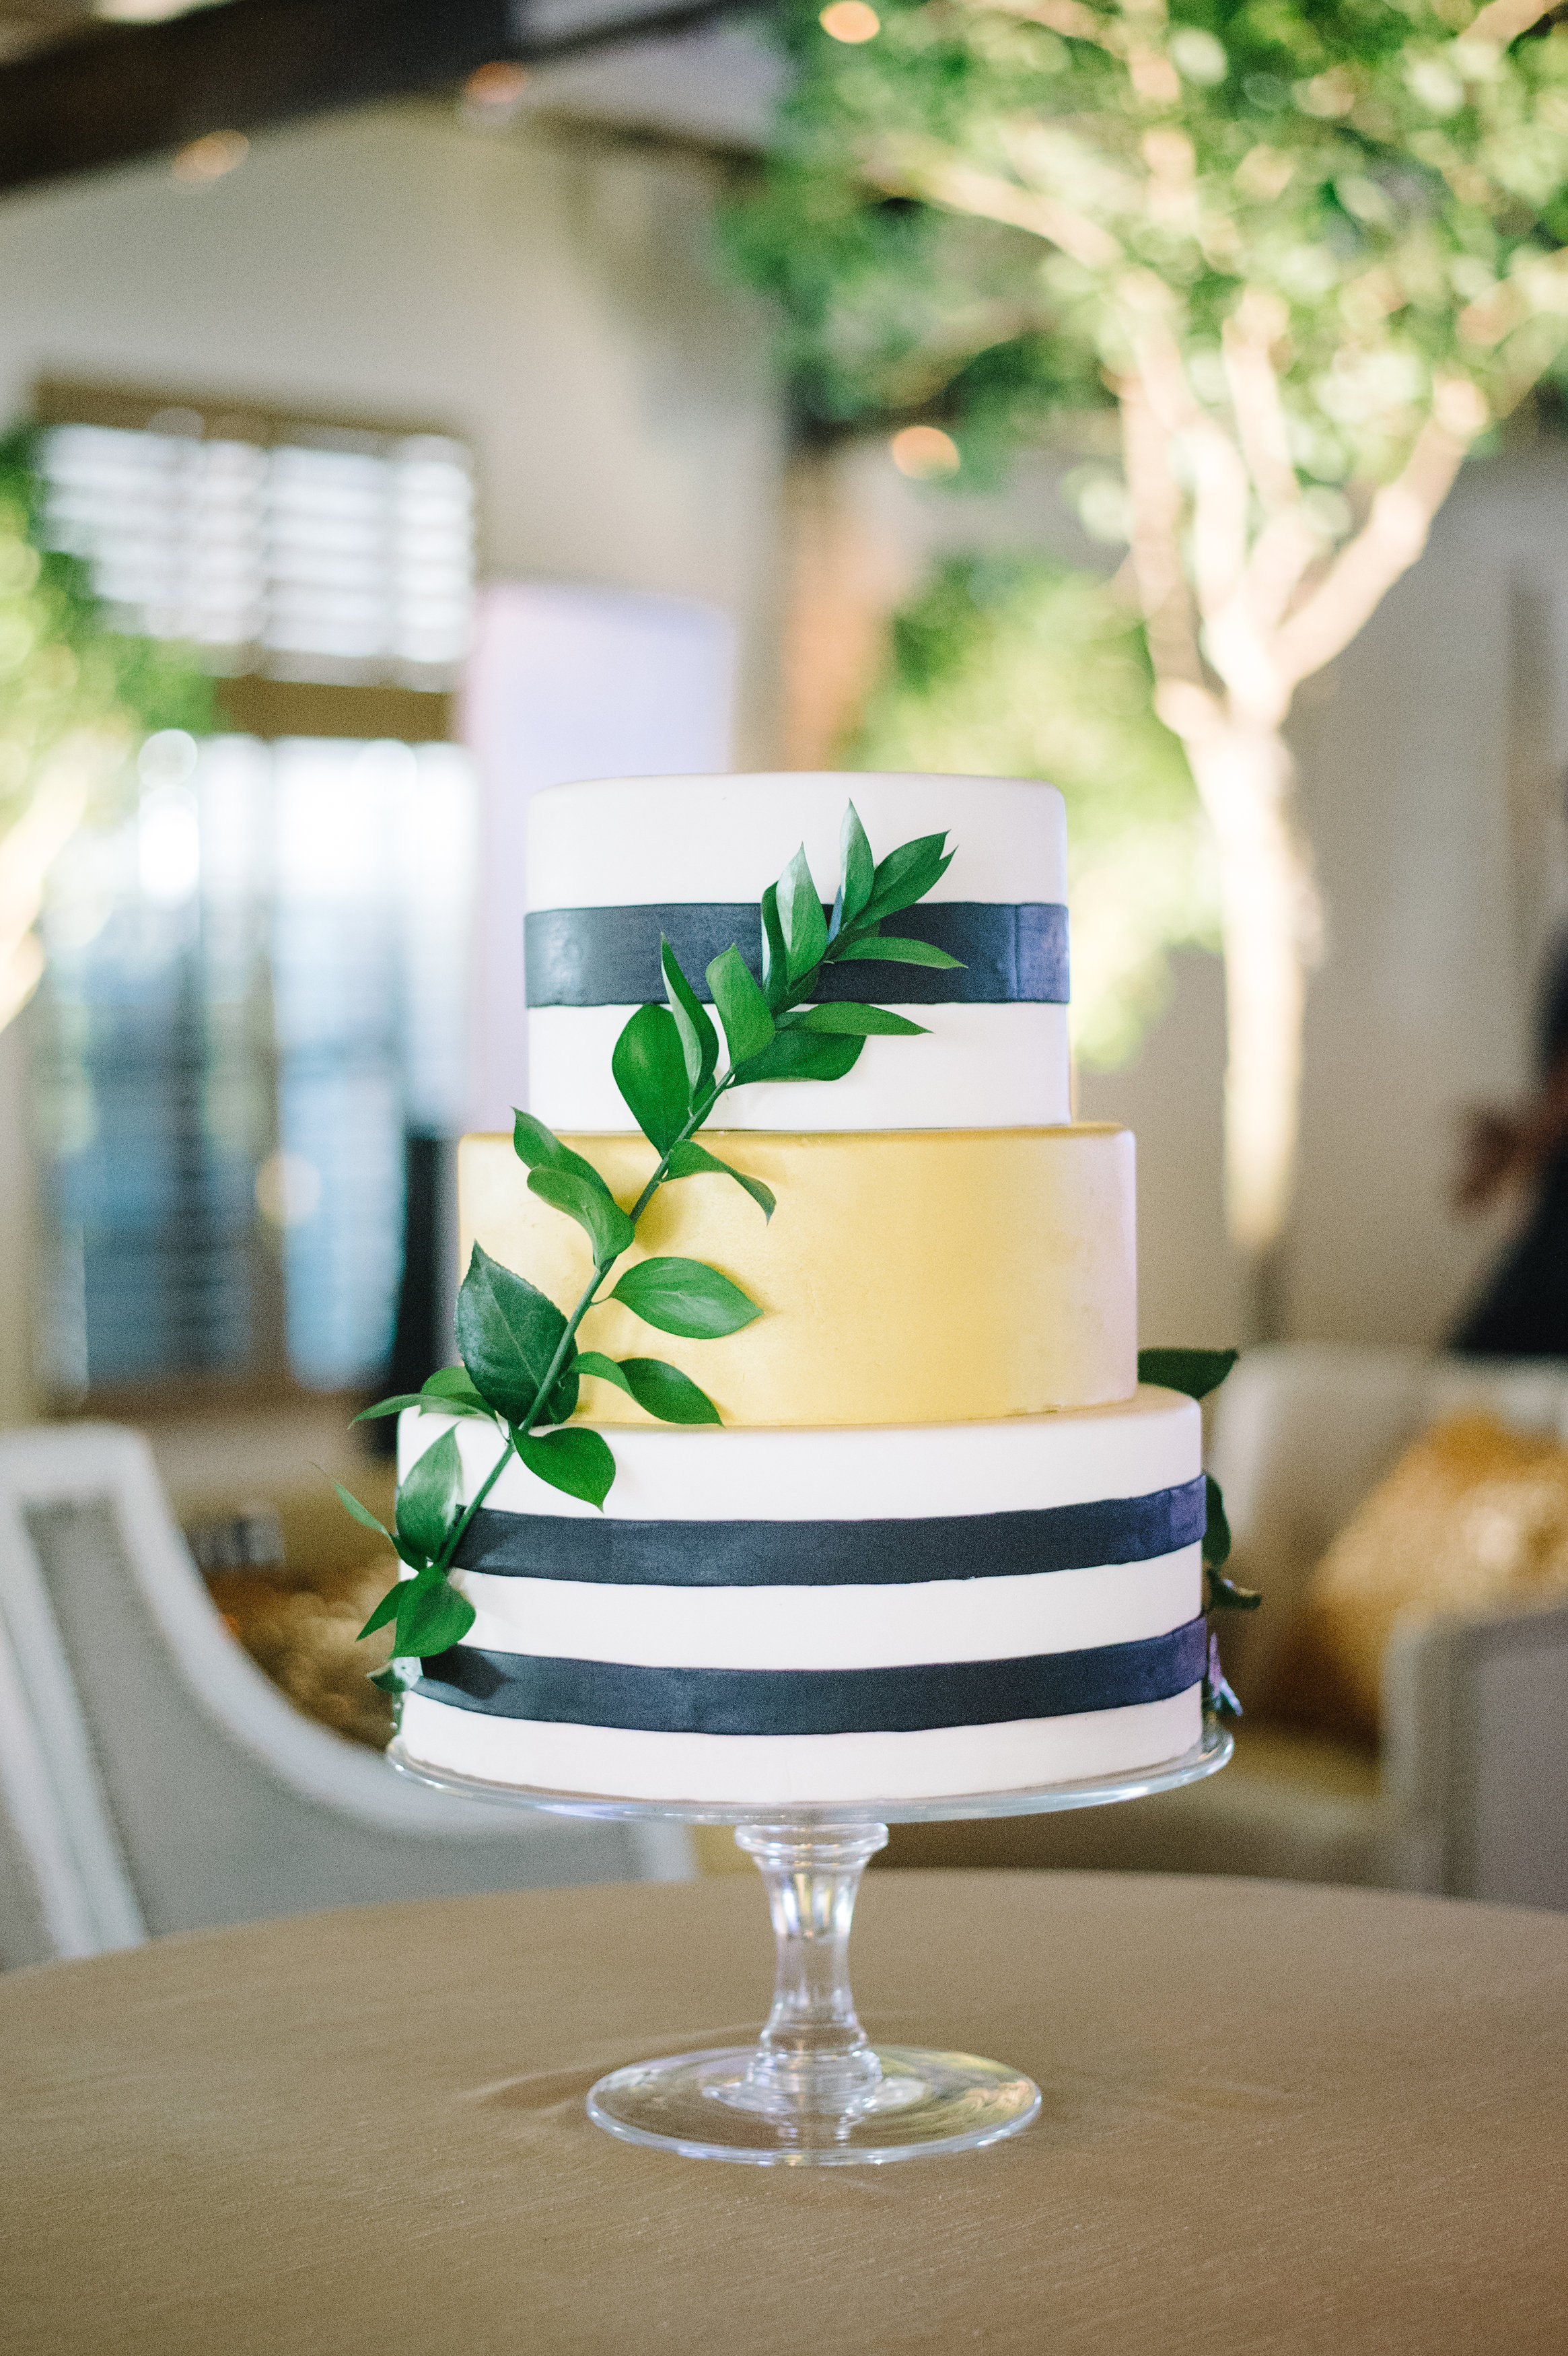 black-and-white-striped-caked-with-gold-center-and-greenery-wrapping-around-charleston-delicious-desserts-the-knot-market-mixer-cannon-green